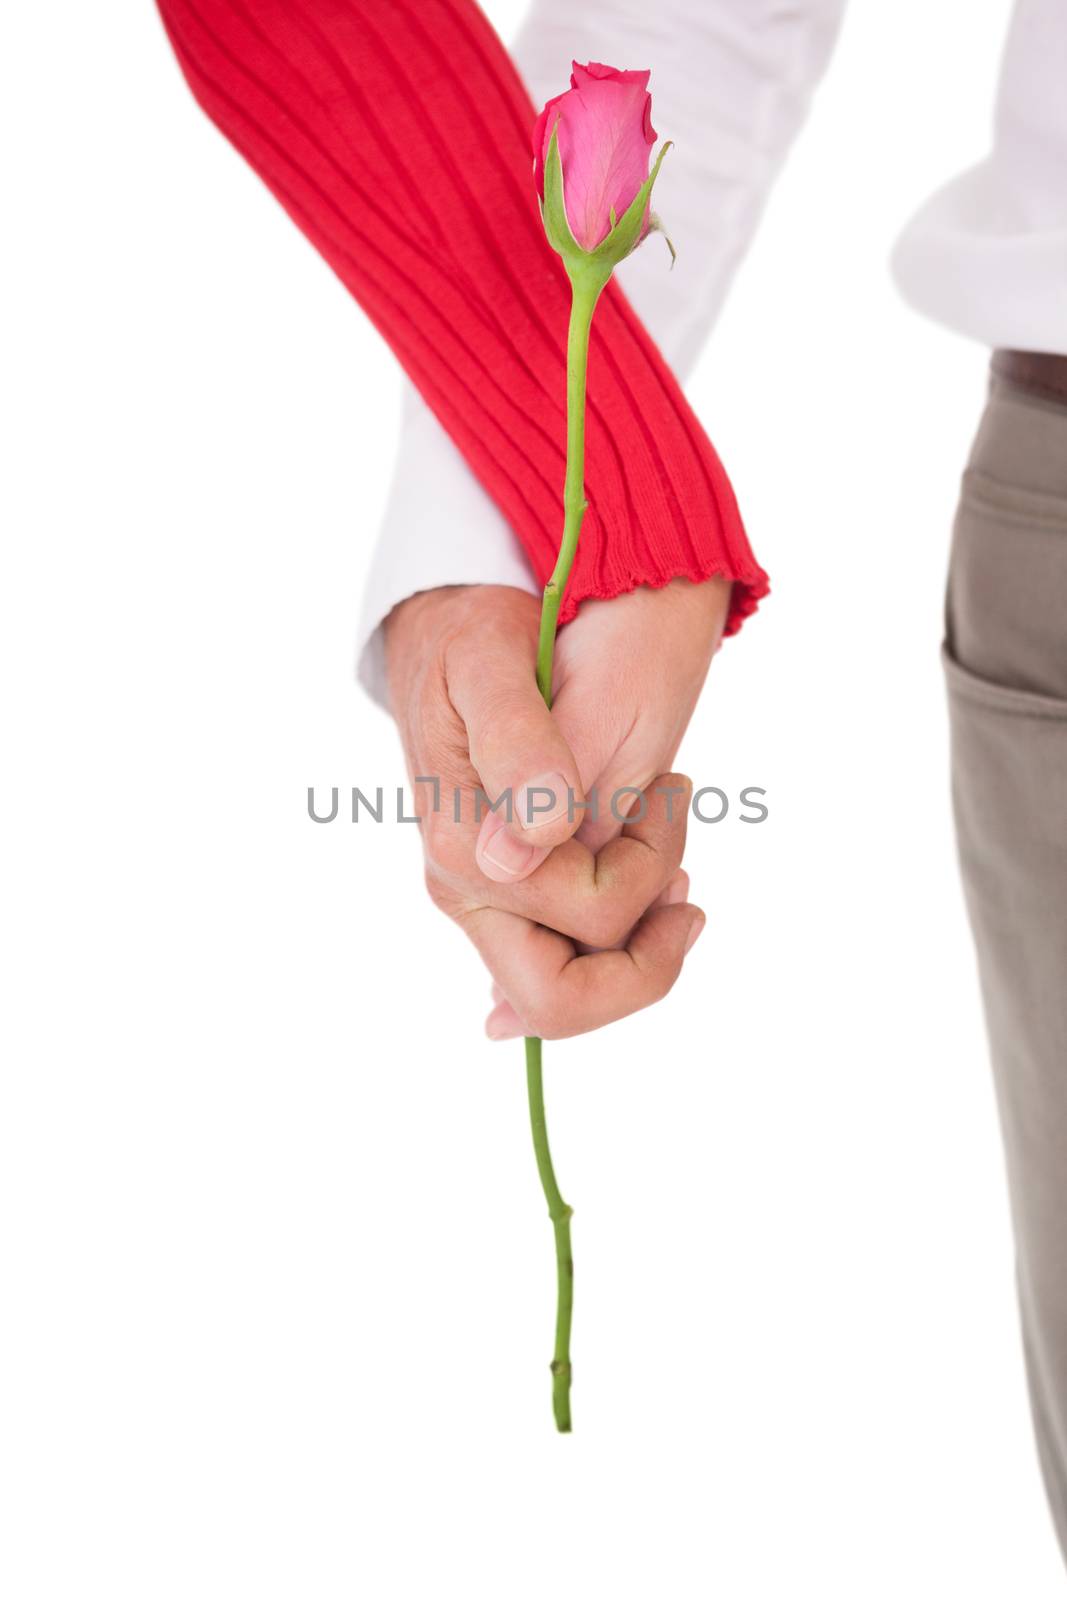 Close up of hands holding rose over white background